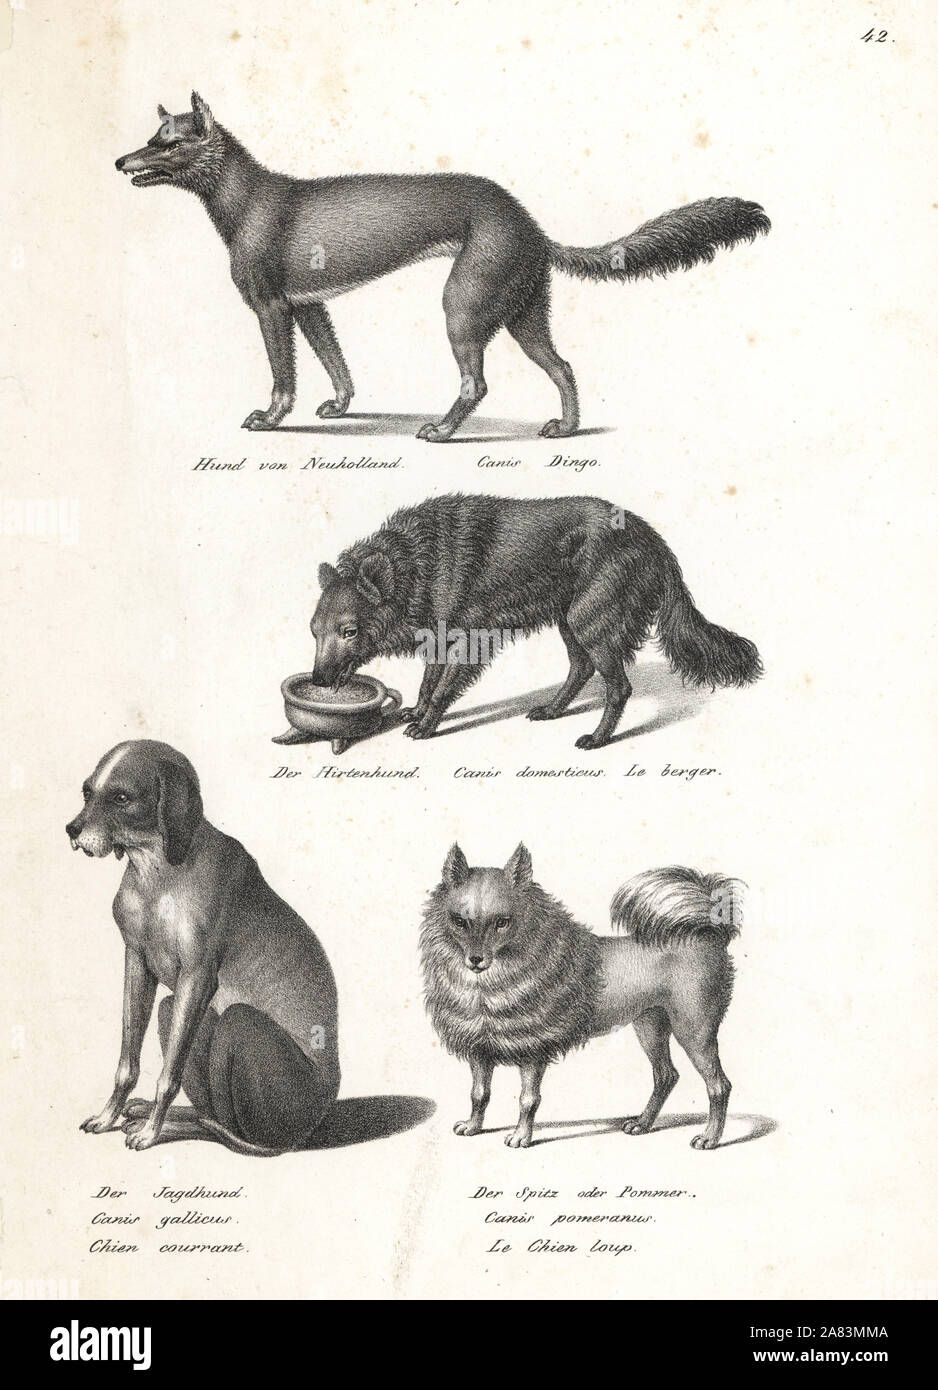 Dingo, Canis dingo, sheepdog, Canis domesticus, scent hound, Canis gallicus, and pomeranian, Canis pomeranus. Lithograph by Karl Joseph Brodtmann from Heinrich Rudolf Schinz's Illustrated Natural History of Men and Animals, 1836. Stock Photo